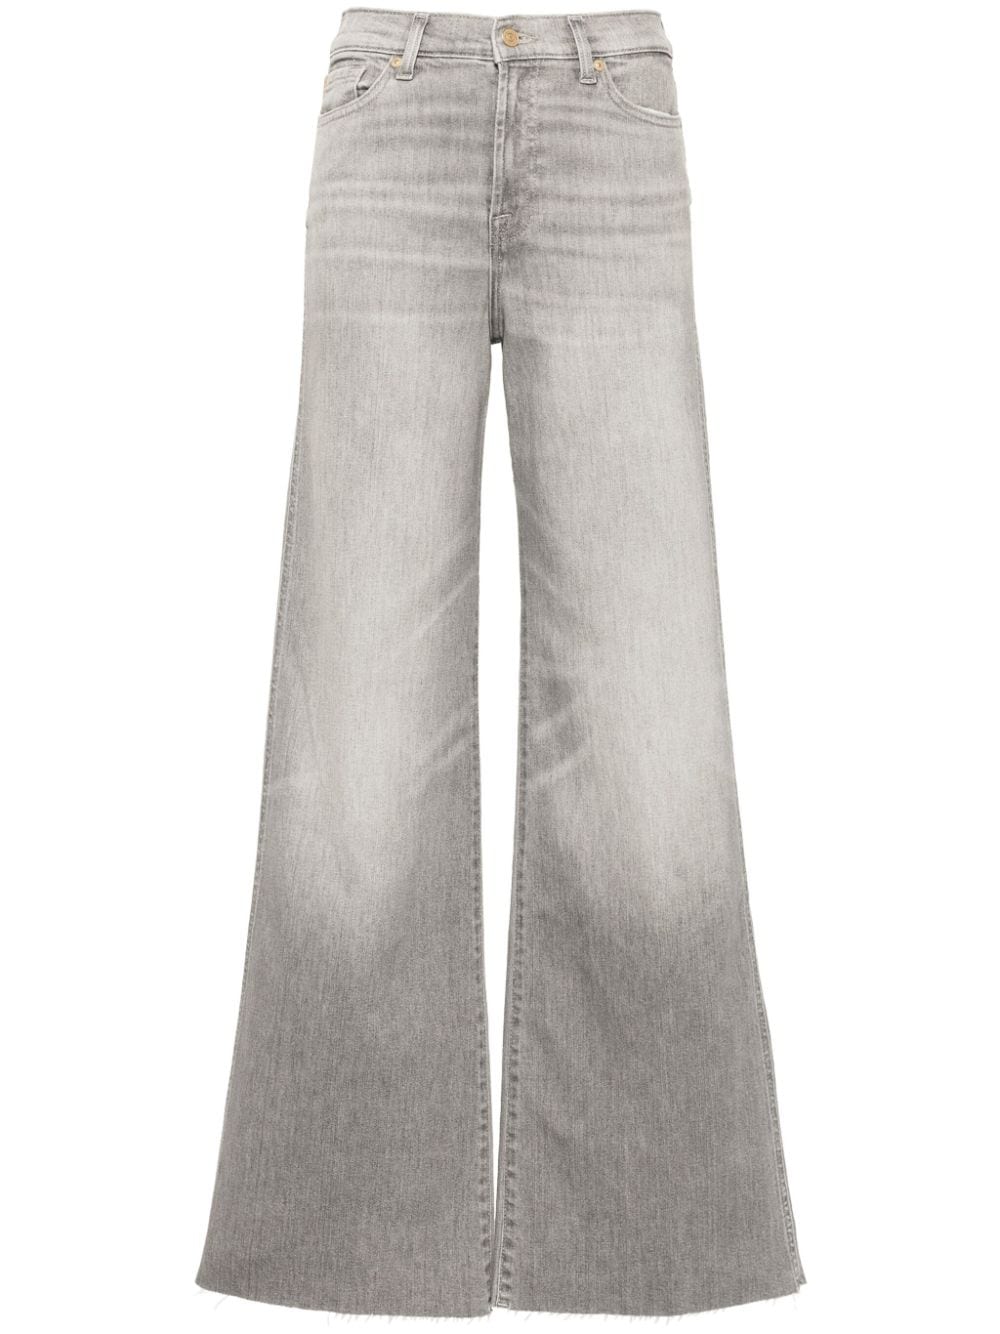 7 For All Mankind Lotta Luxe Vintage Dust mid-rise flared jeans - Grey von 7 For All Mankind